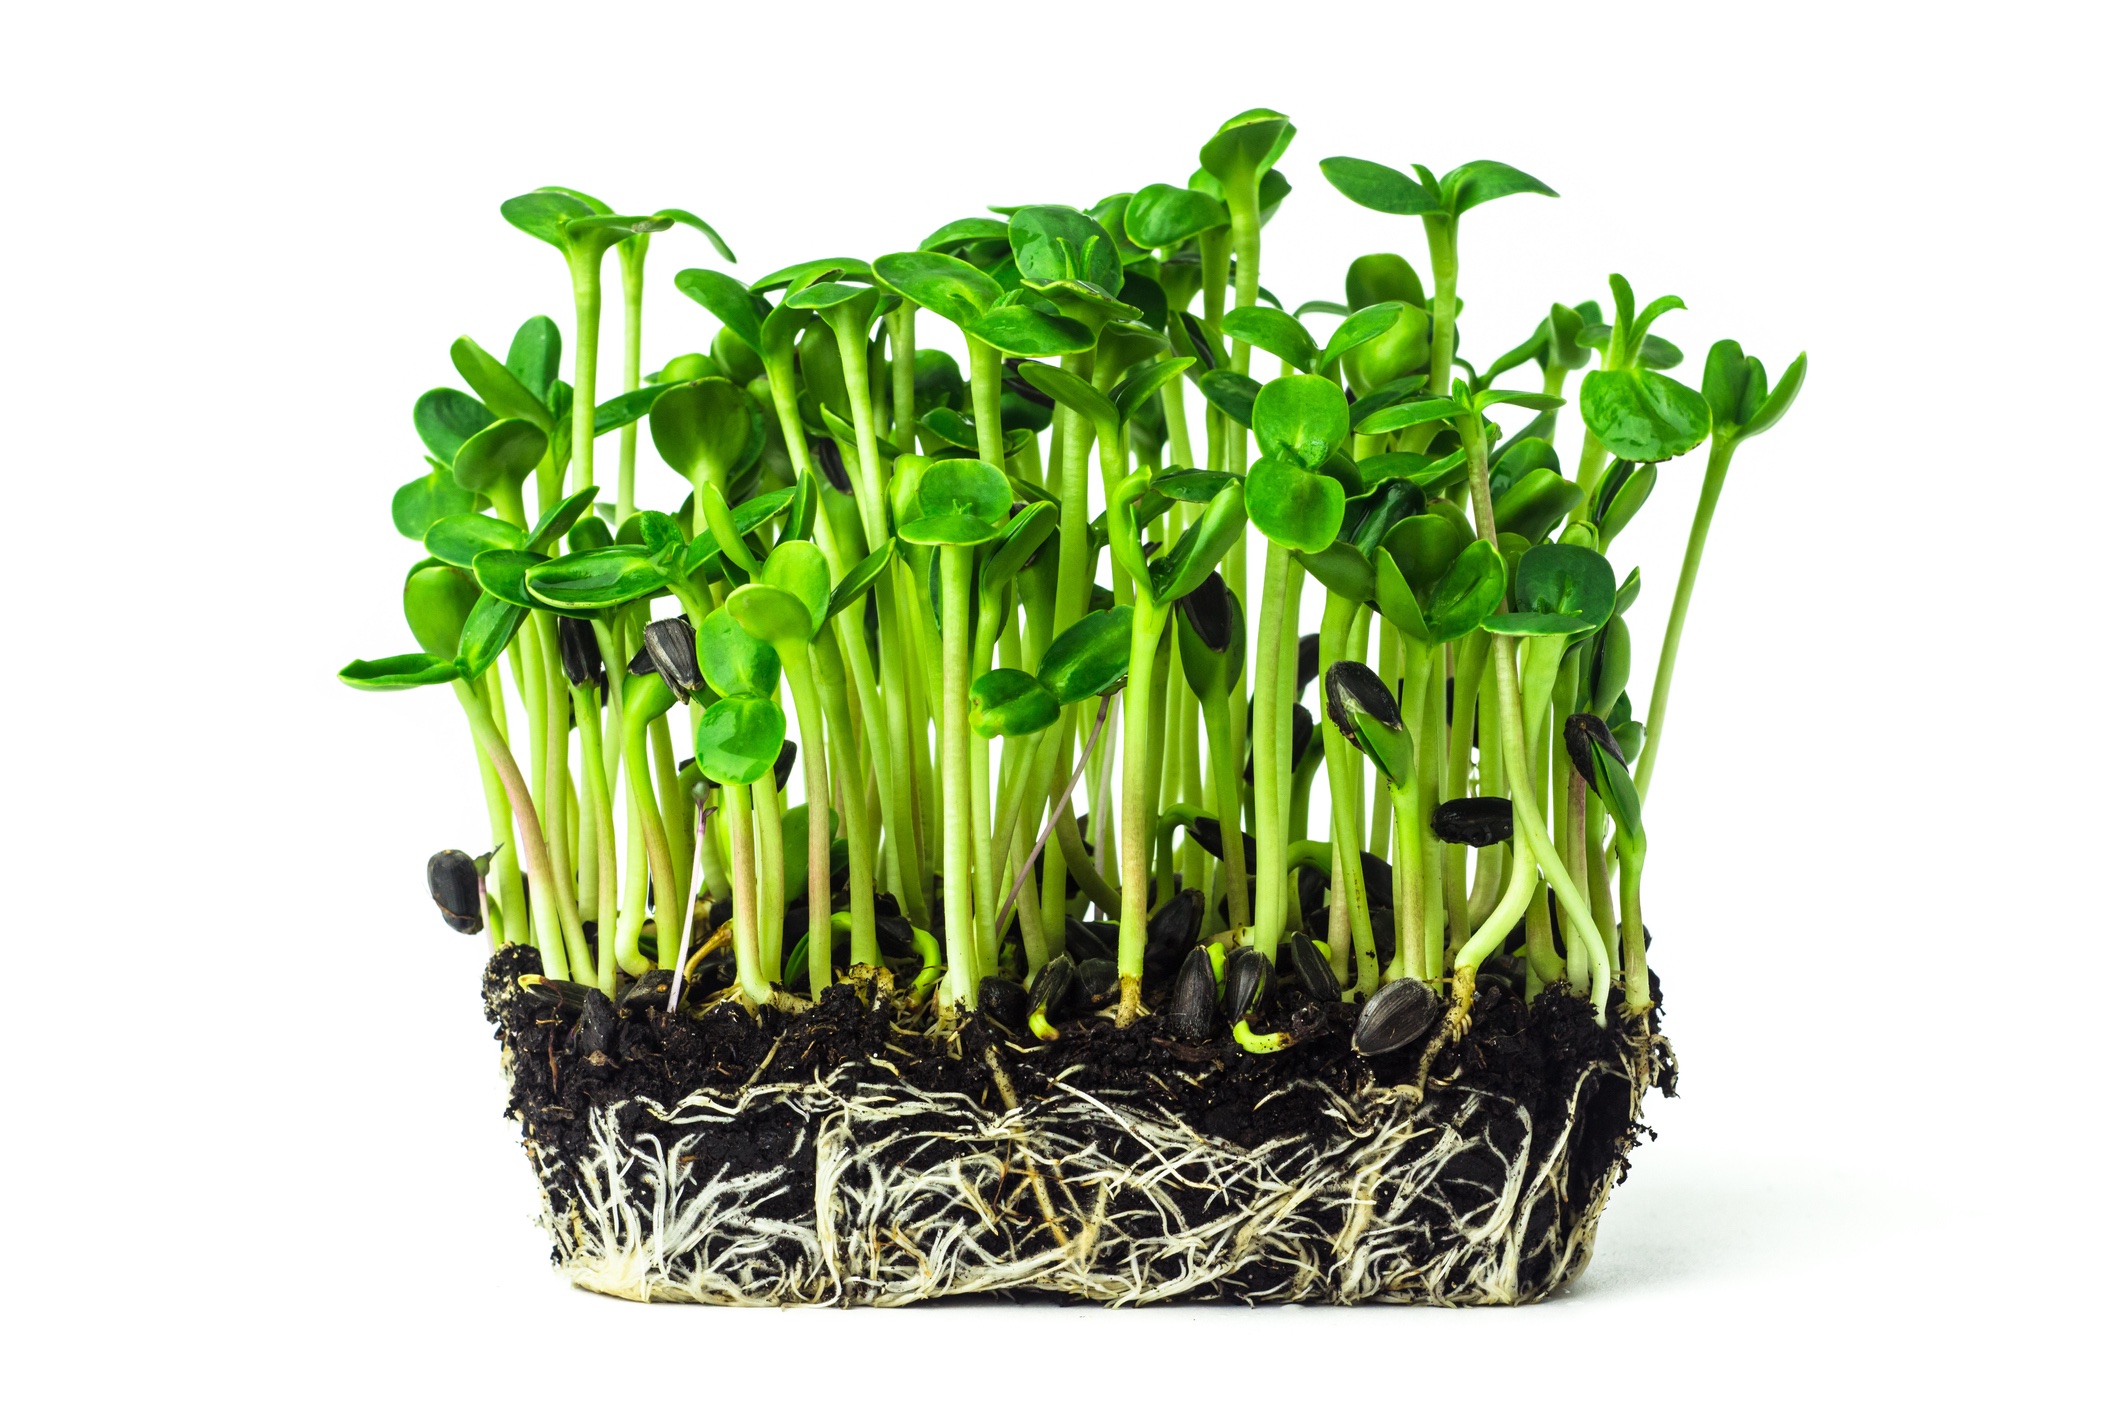 A group of green microgreens